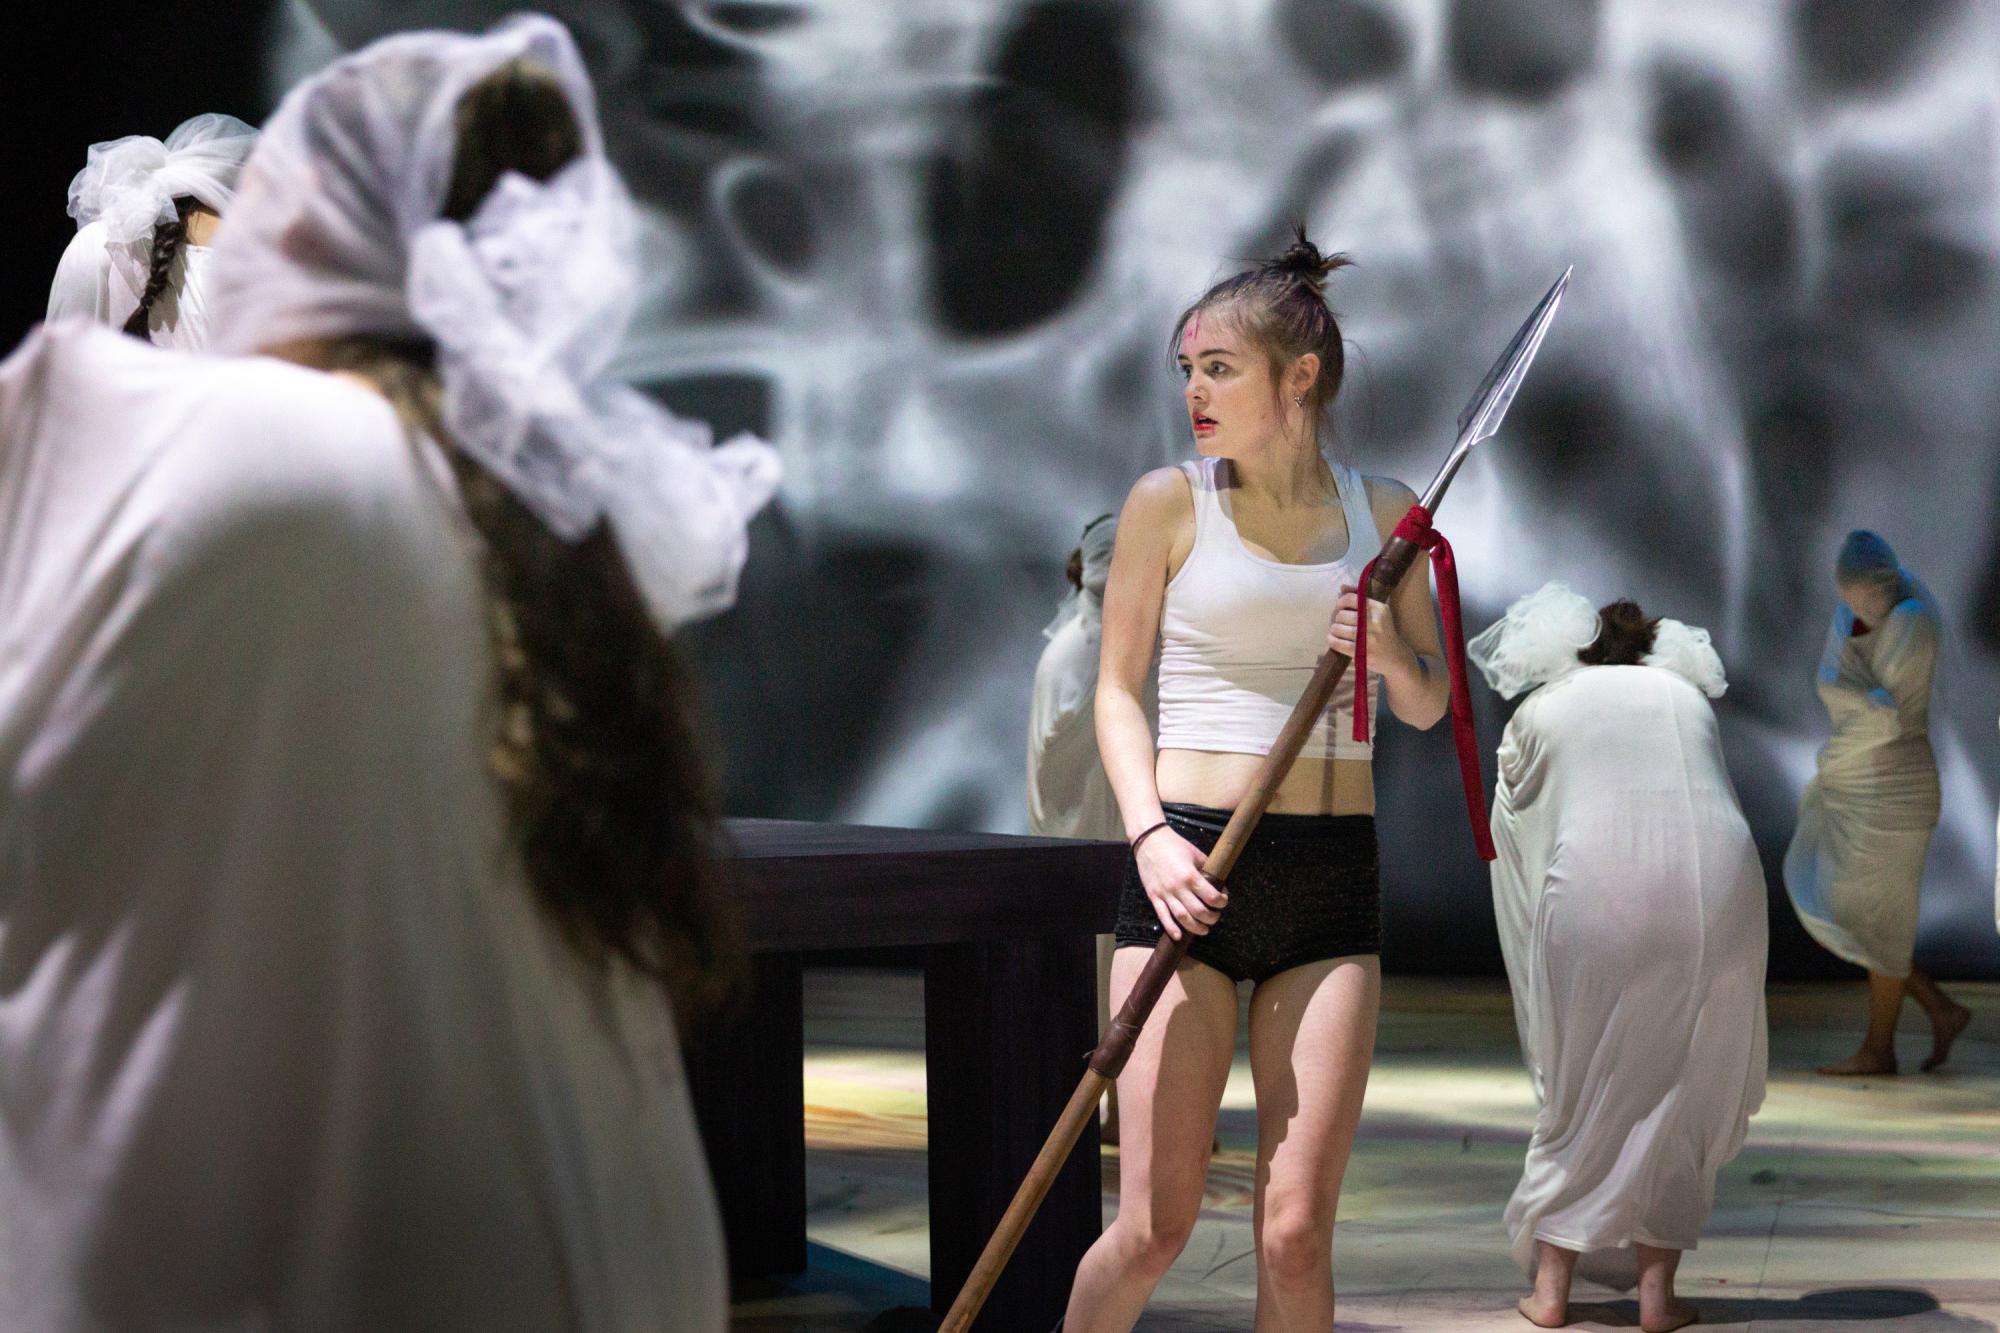 actor holding a spear looks at an ensemble of women cloaked in white